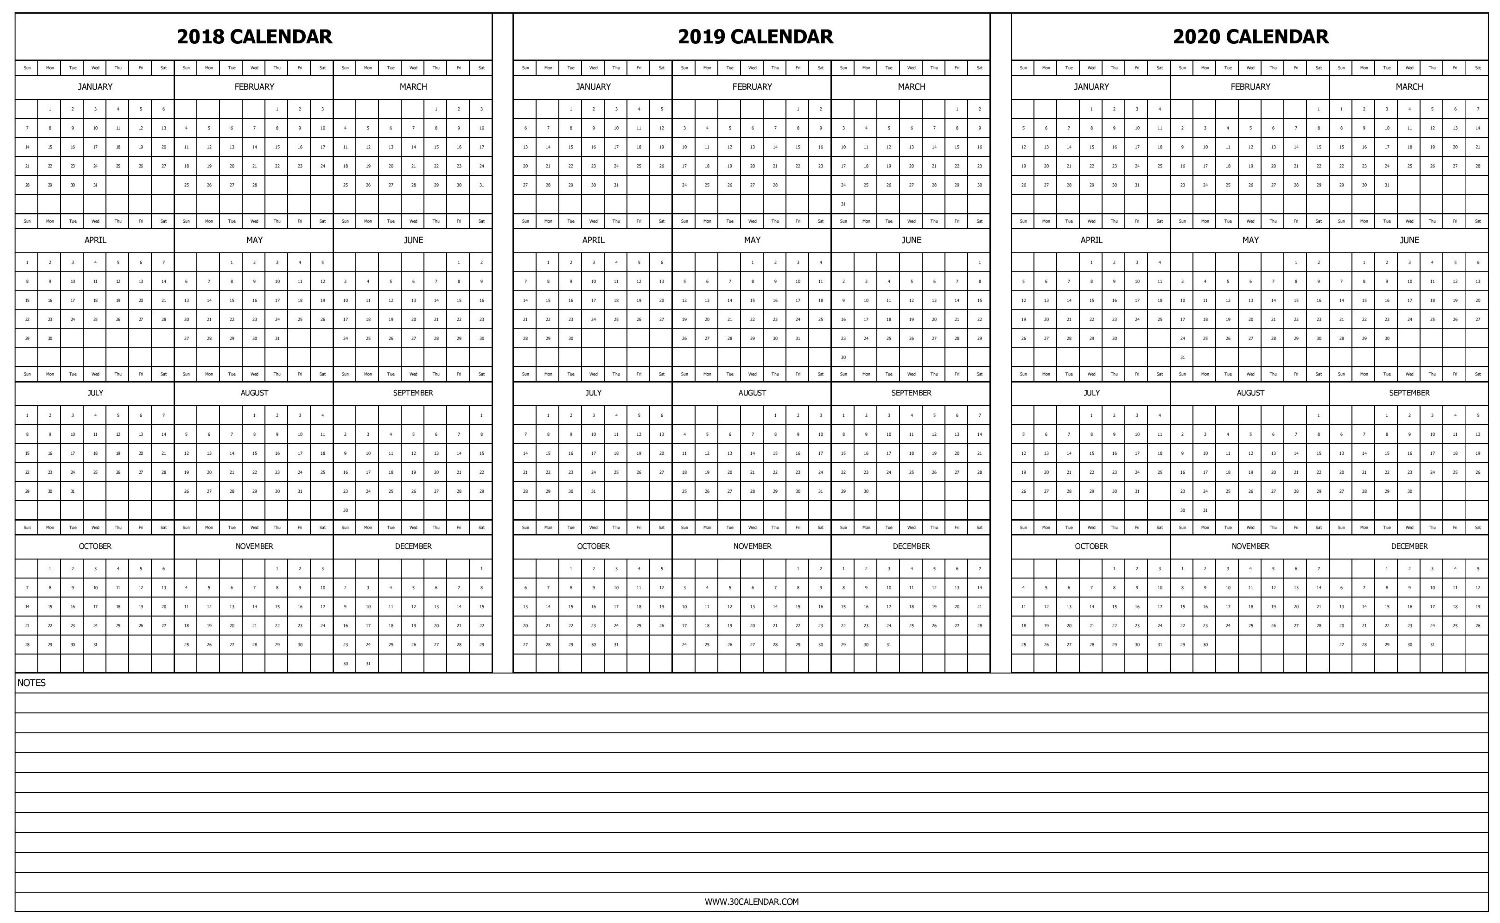 2018 2019 And 2020 Calendar To Print | Blank Three Year Template for 3 Year Calendar Printable 2018 2019 2020